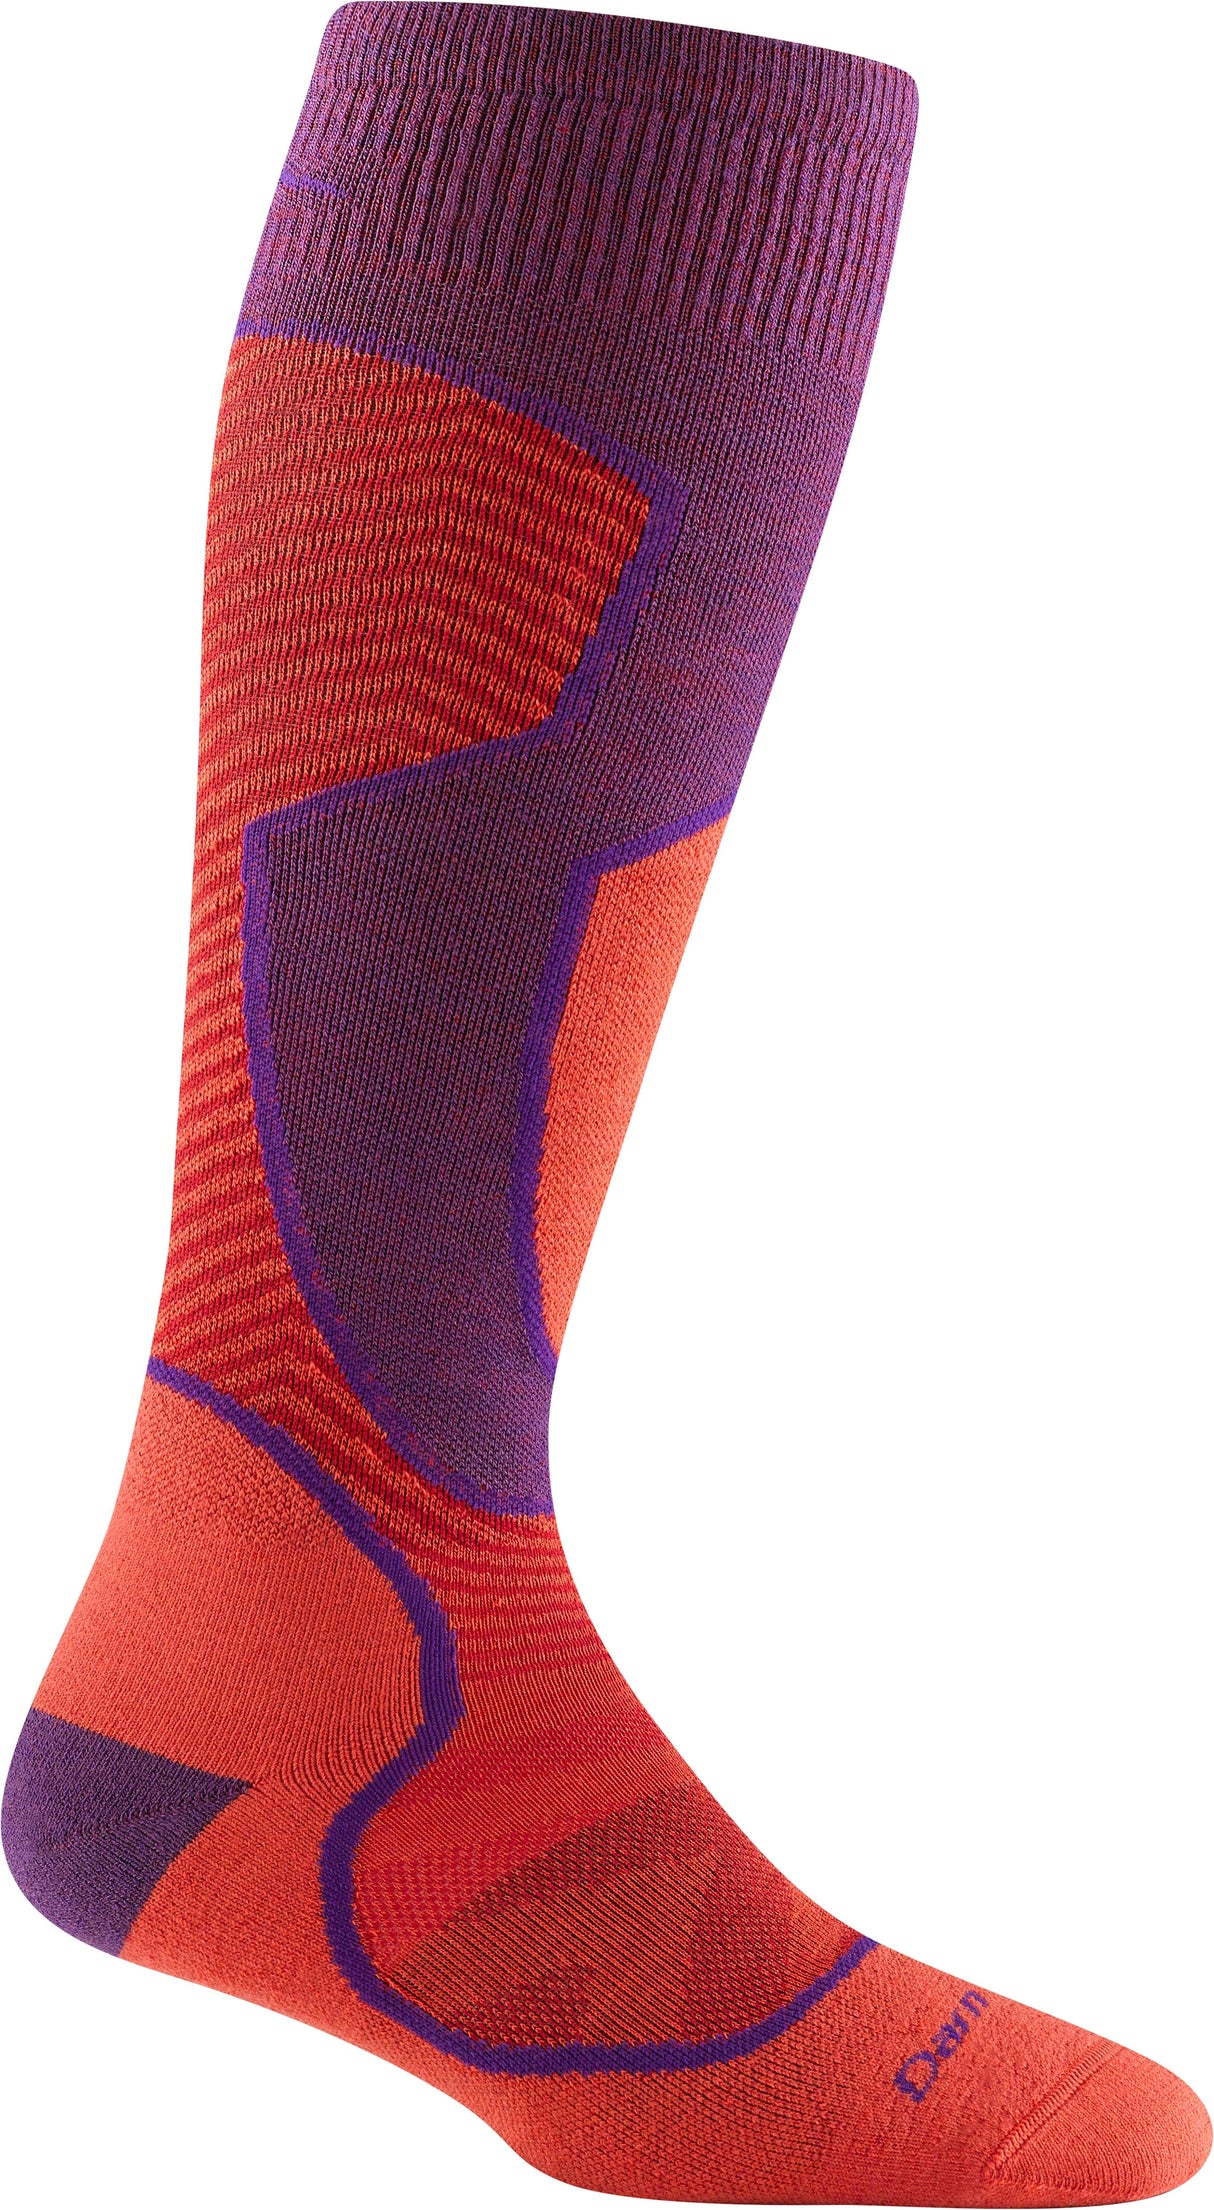 Darn Tough Womens Outer Limits Over-The-Calf Lightweight Ski & Snowboard Socks  -  Small / Nightshade